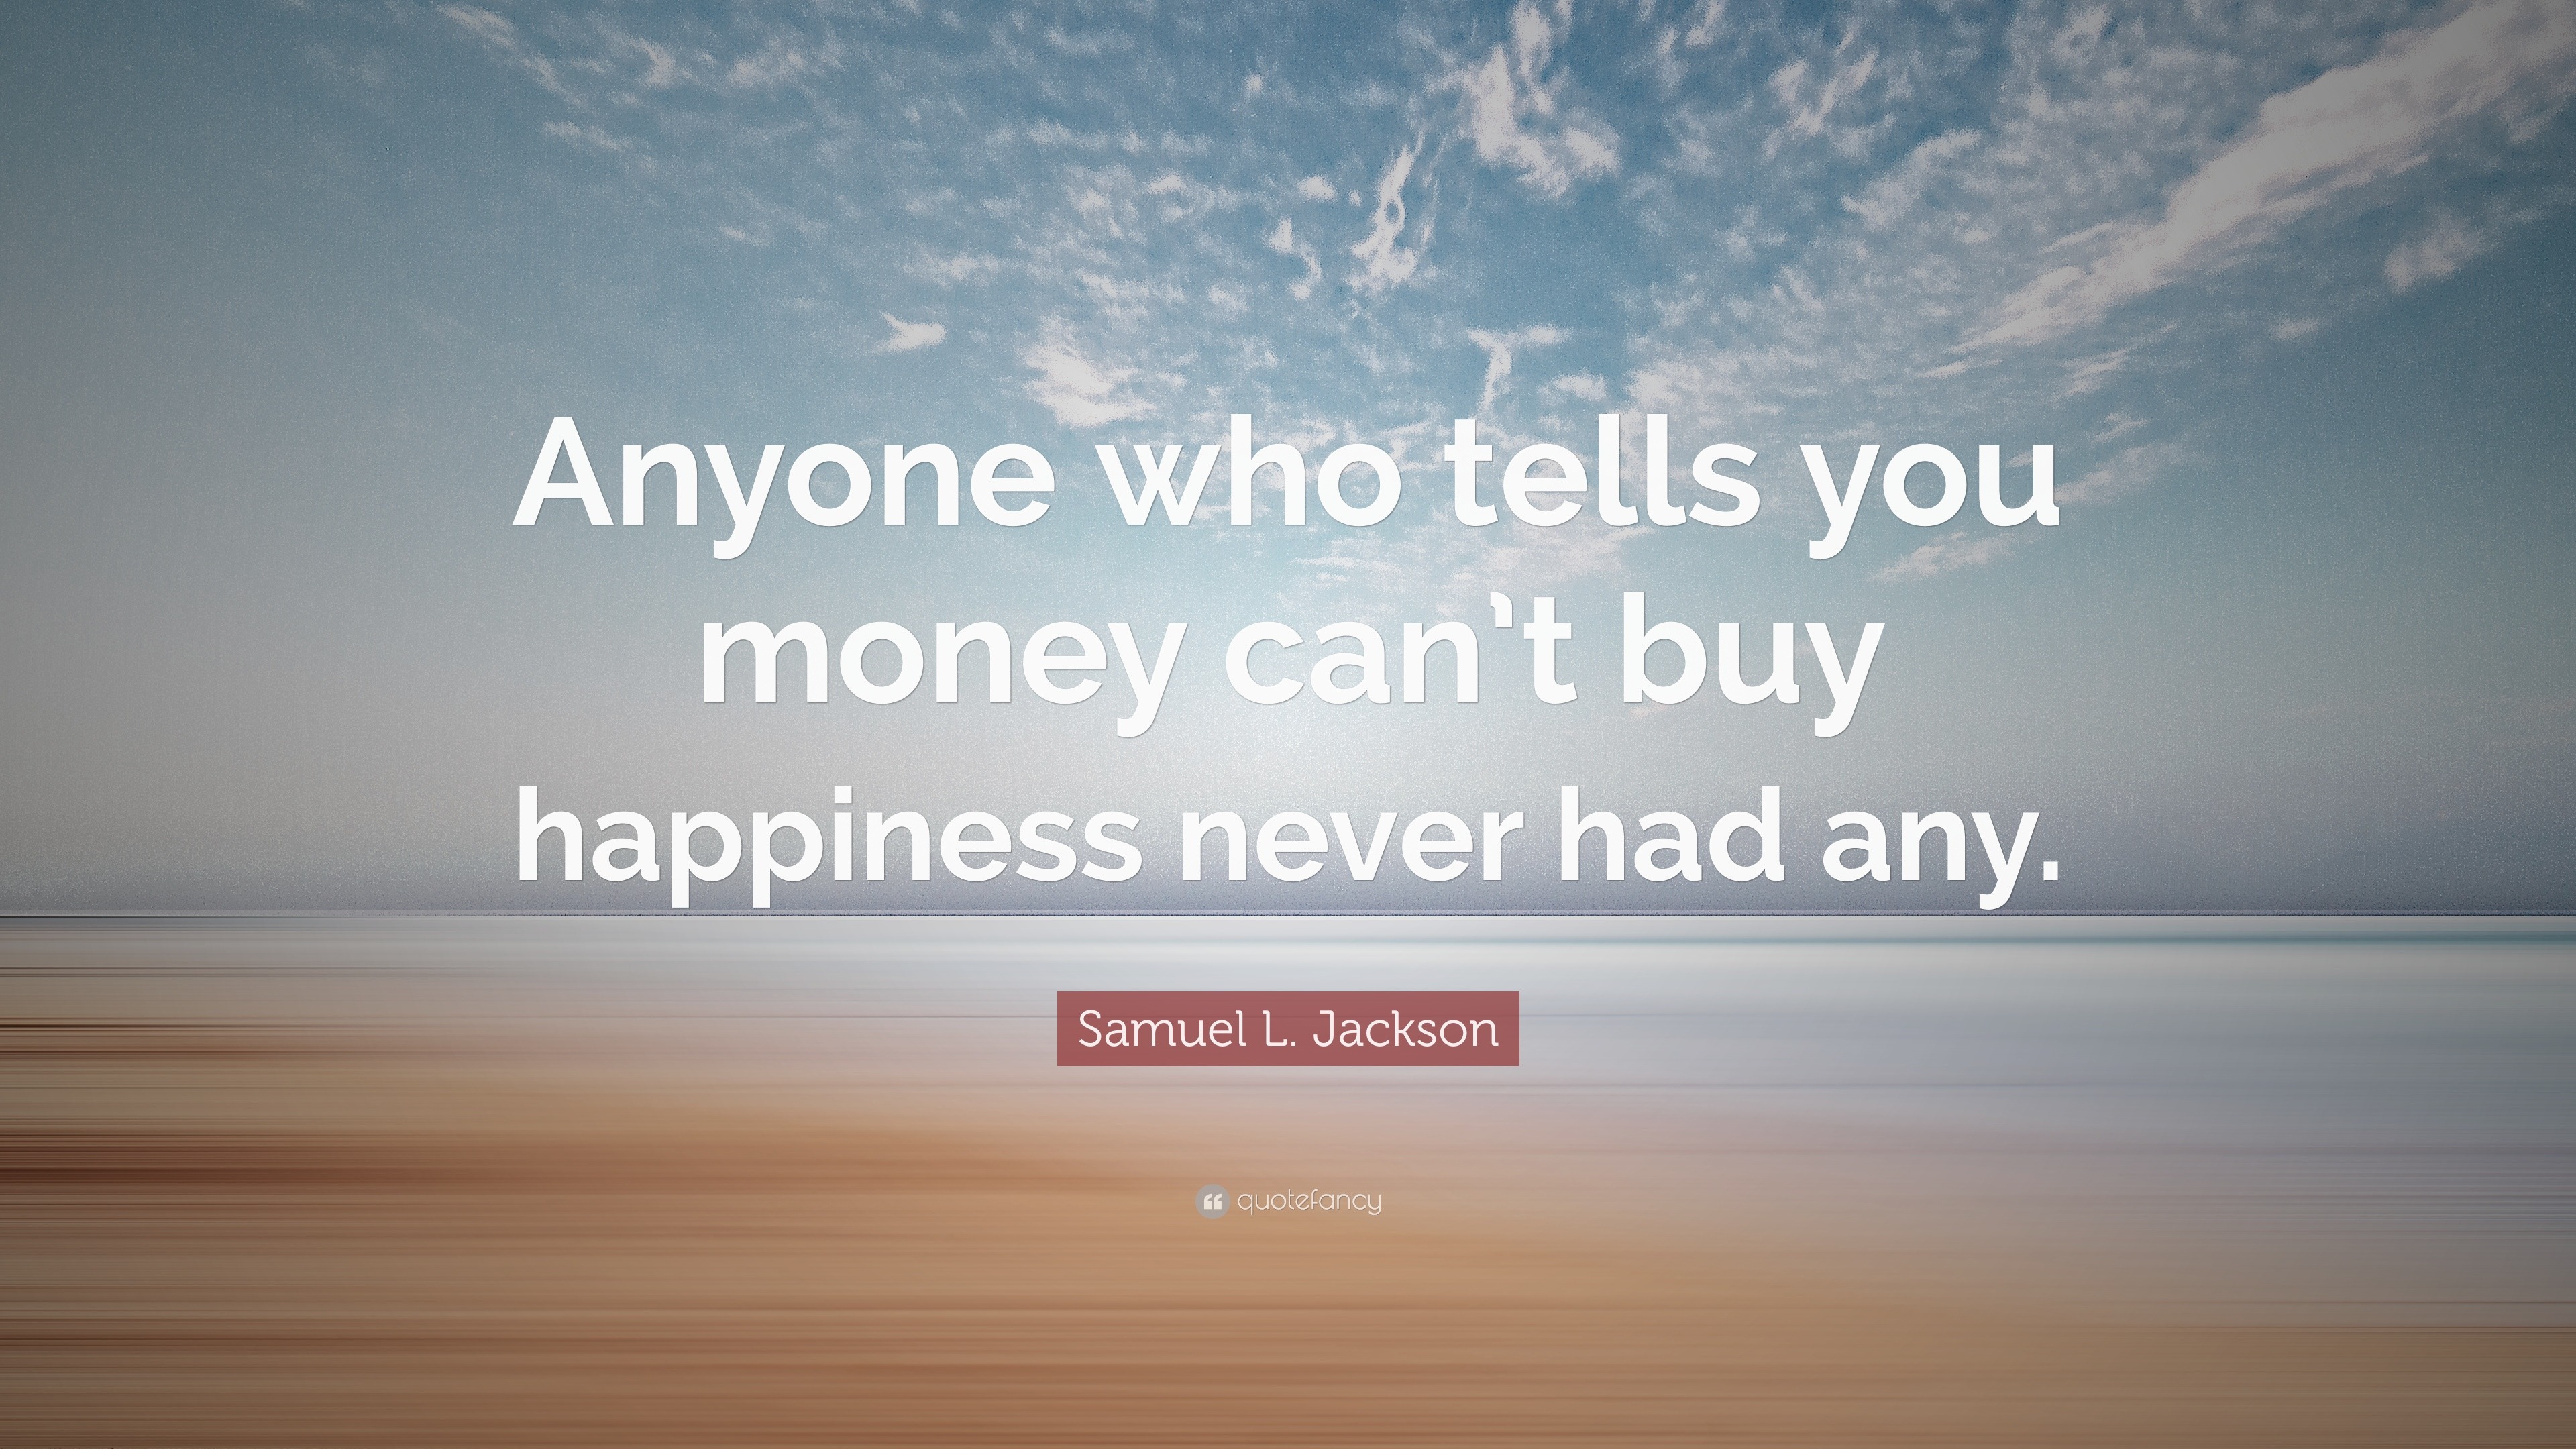 Samuel L. Jackson Quote: “Anyone who tells you money can’t buy